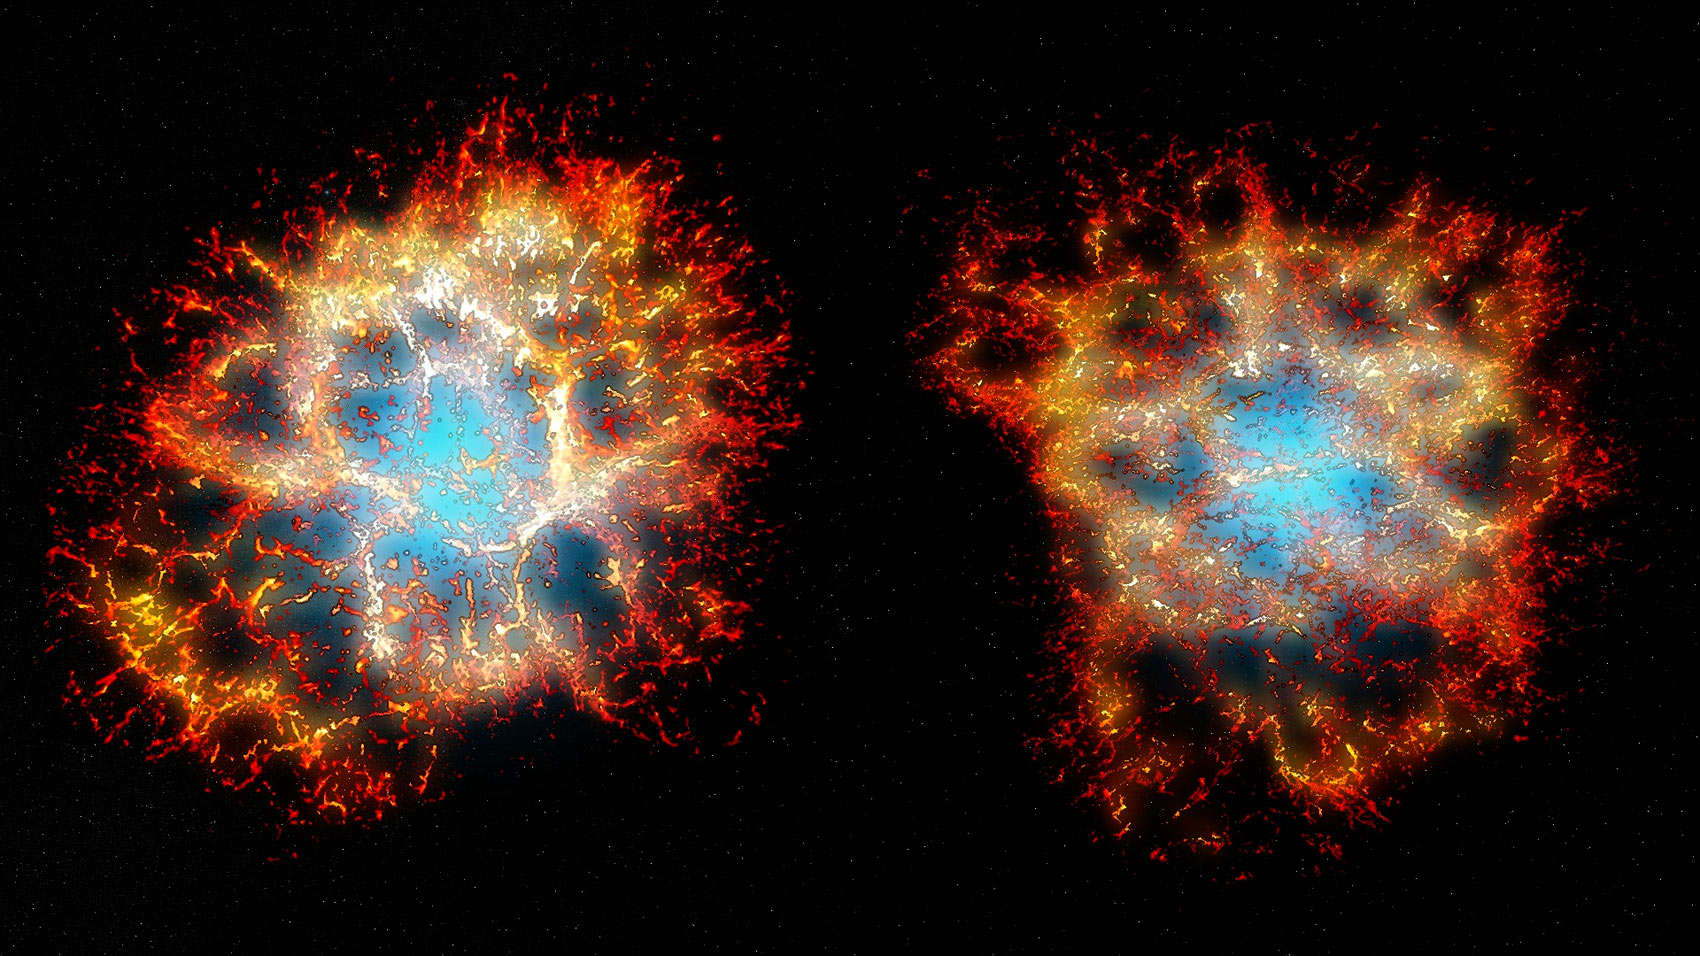 3D models of the Crab Nebula generated from spectra: The view as we see it from Earth (left) versus from a different angle, where the heart shape becomes more apparent. Credit: Thomas Martin, Danny Milisavljevic and Laurent Drissen